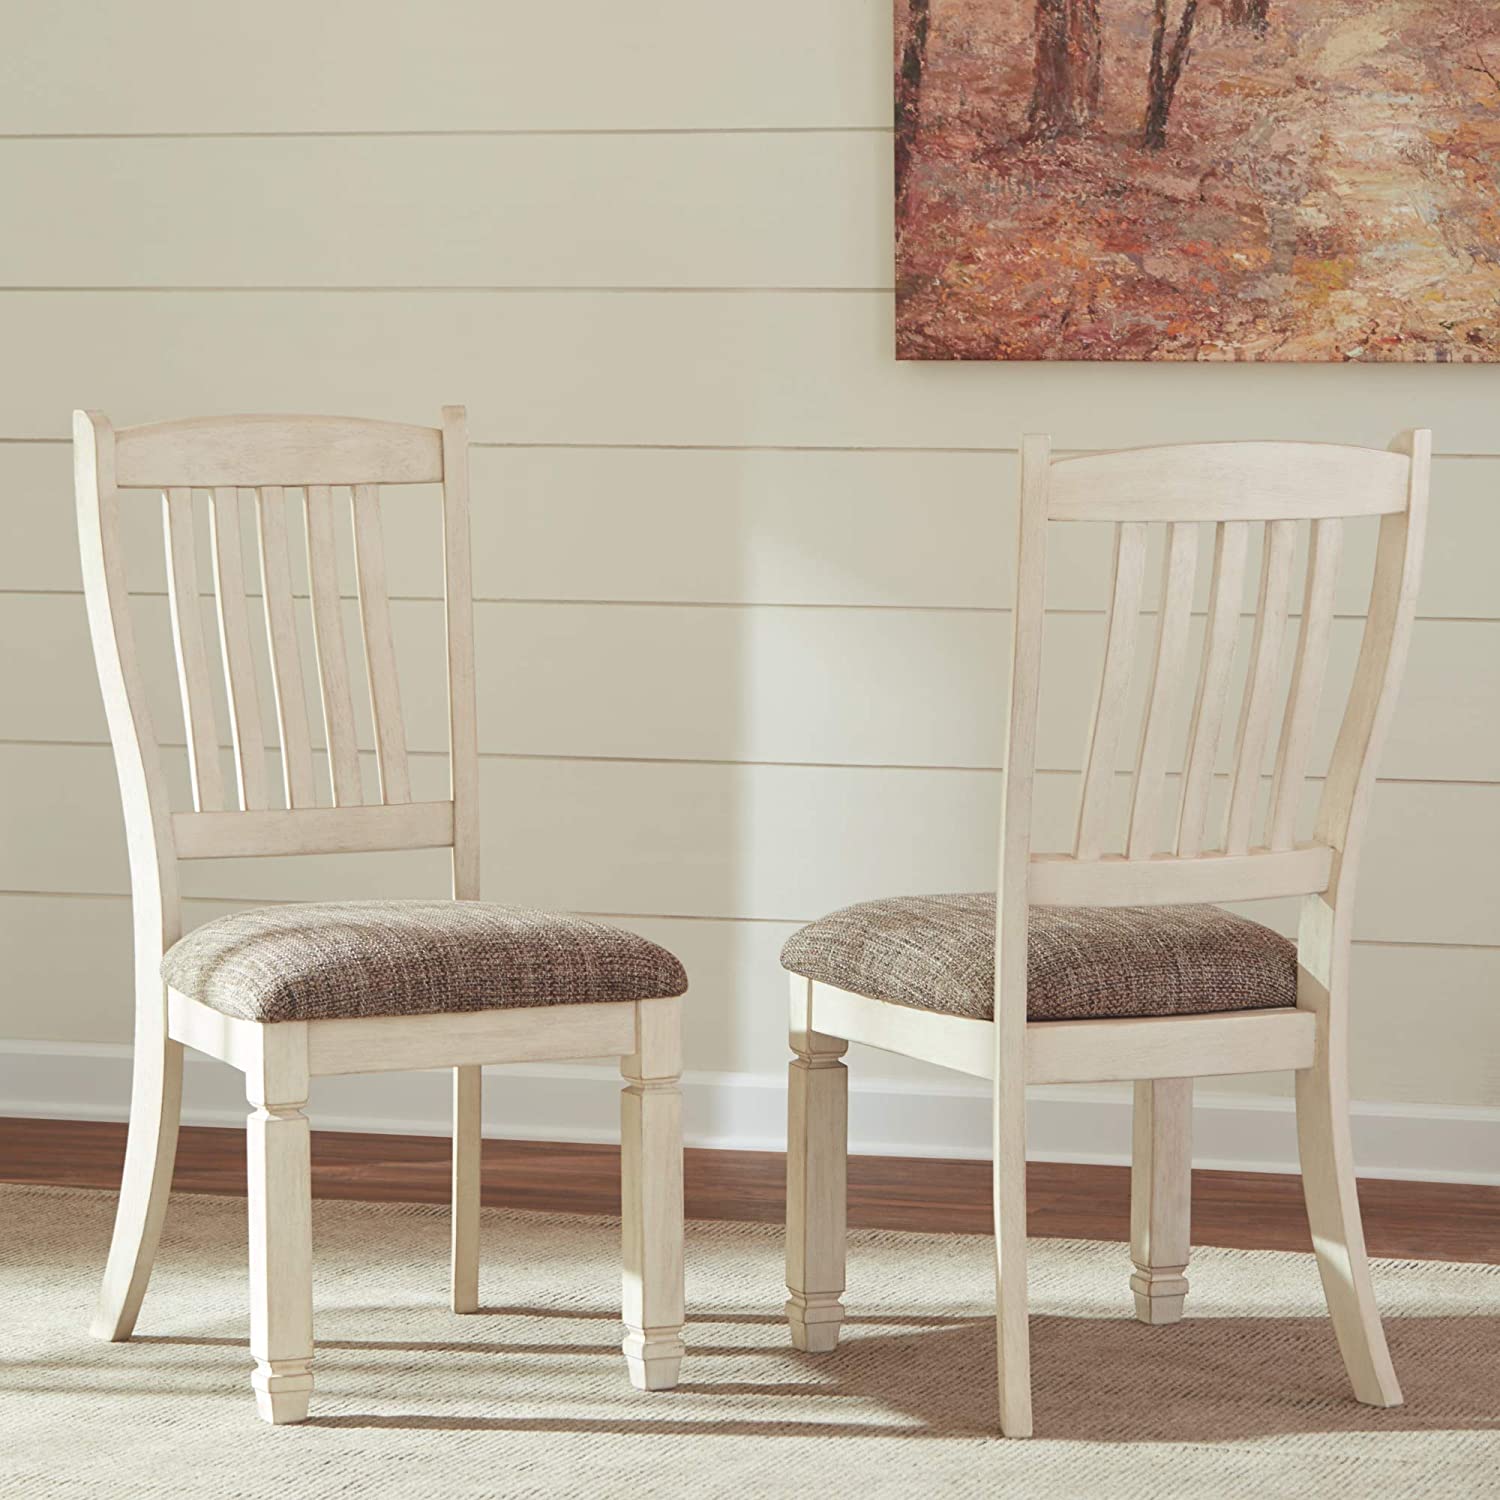 Bolanburg Upholstered Dining Room Chair Set of 2, Antique